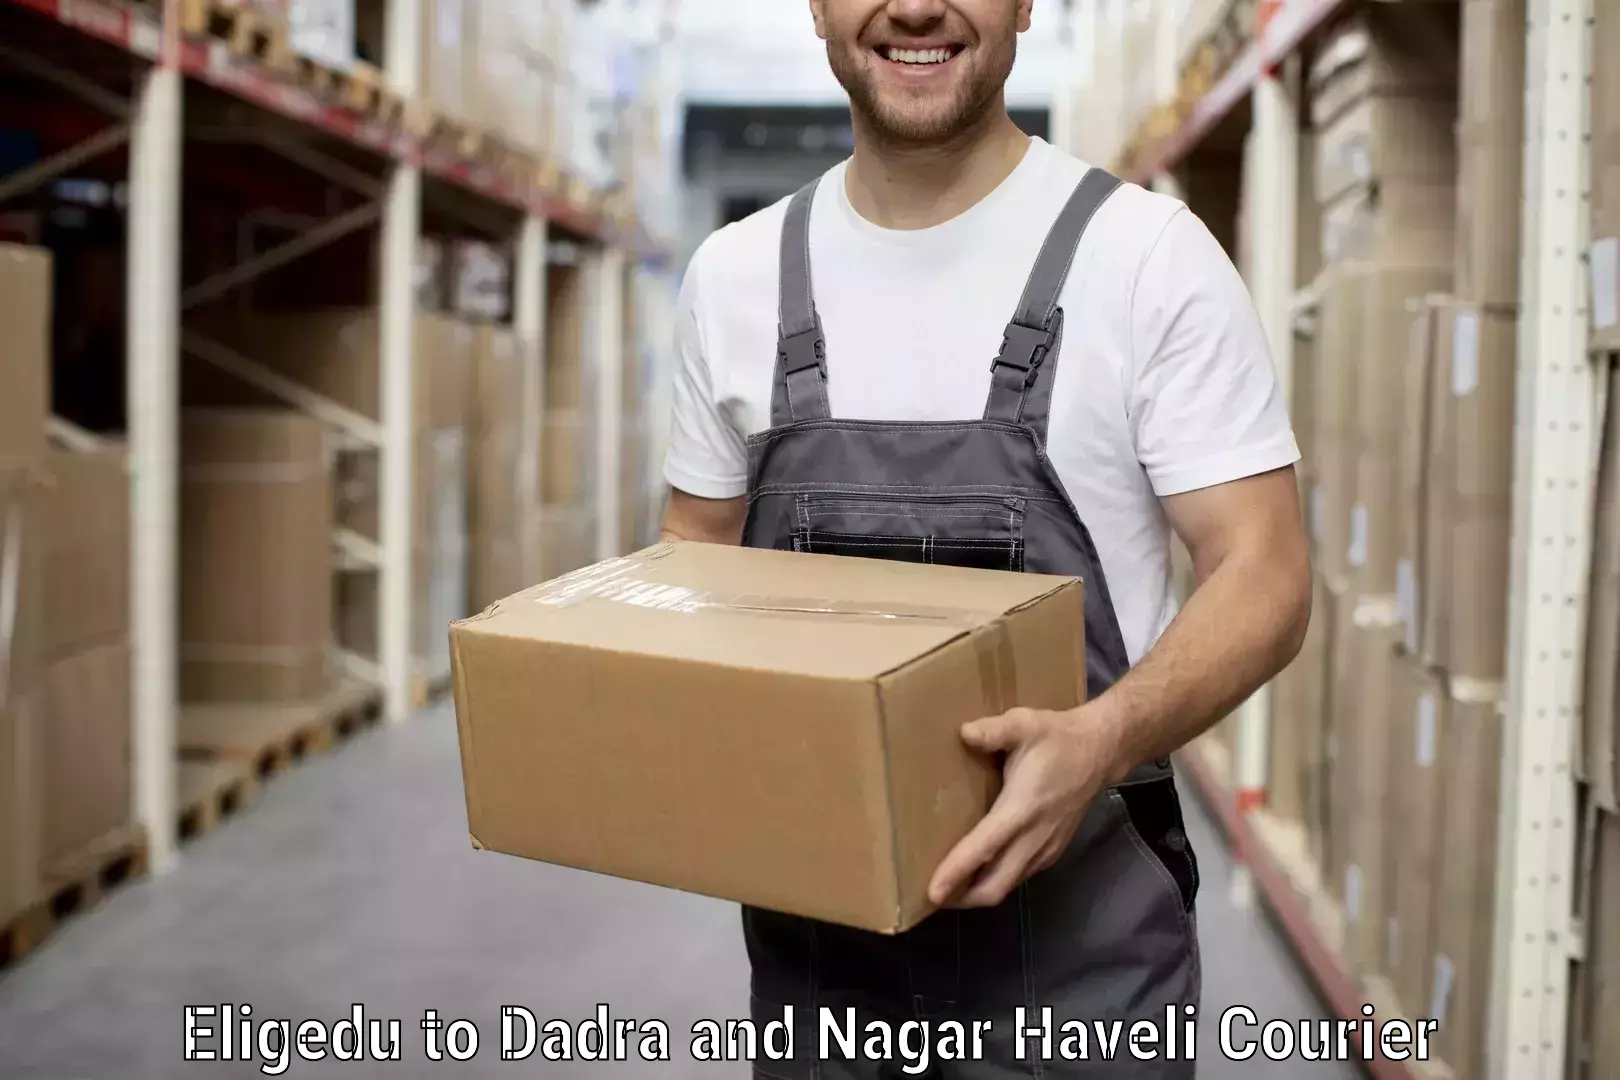 Professional movers and packers Eligedu to Dadra and Nagar Haveli